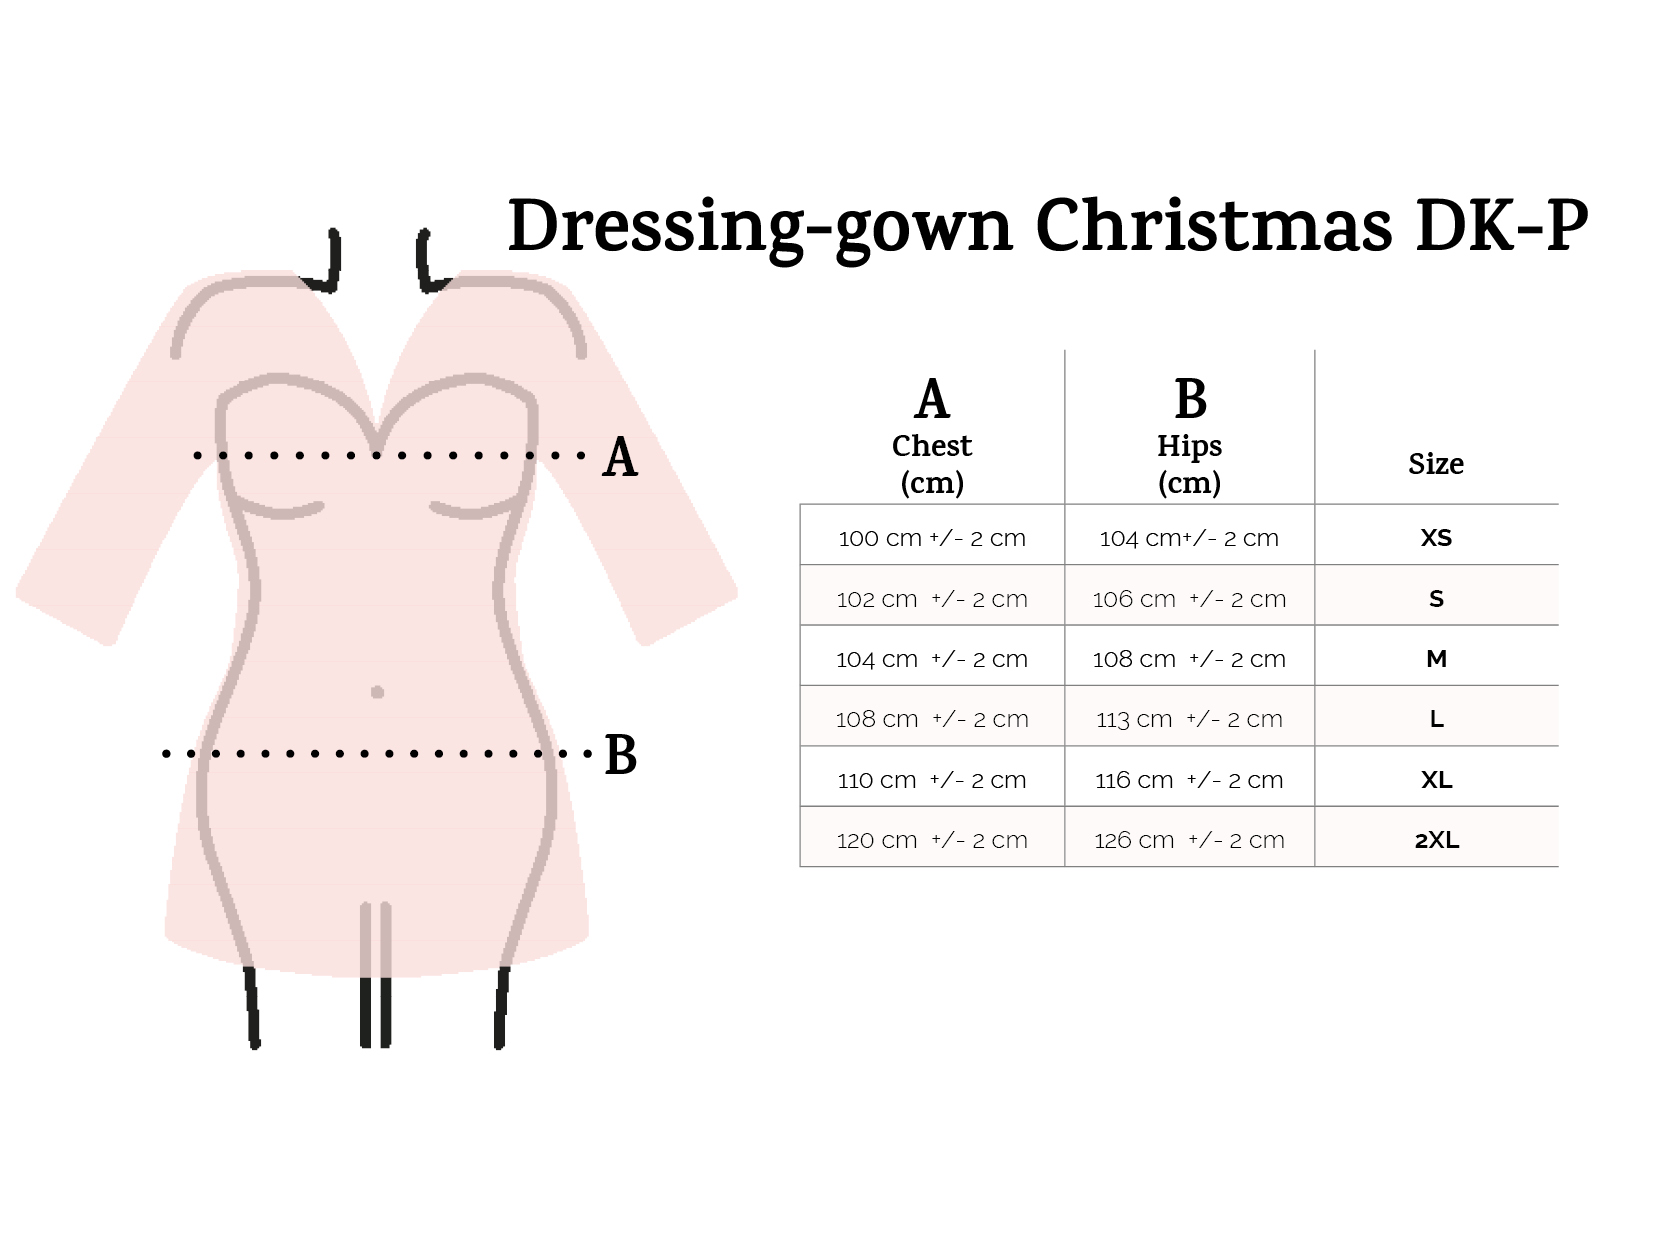 Dressing-gown Christmas DK-P